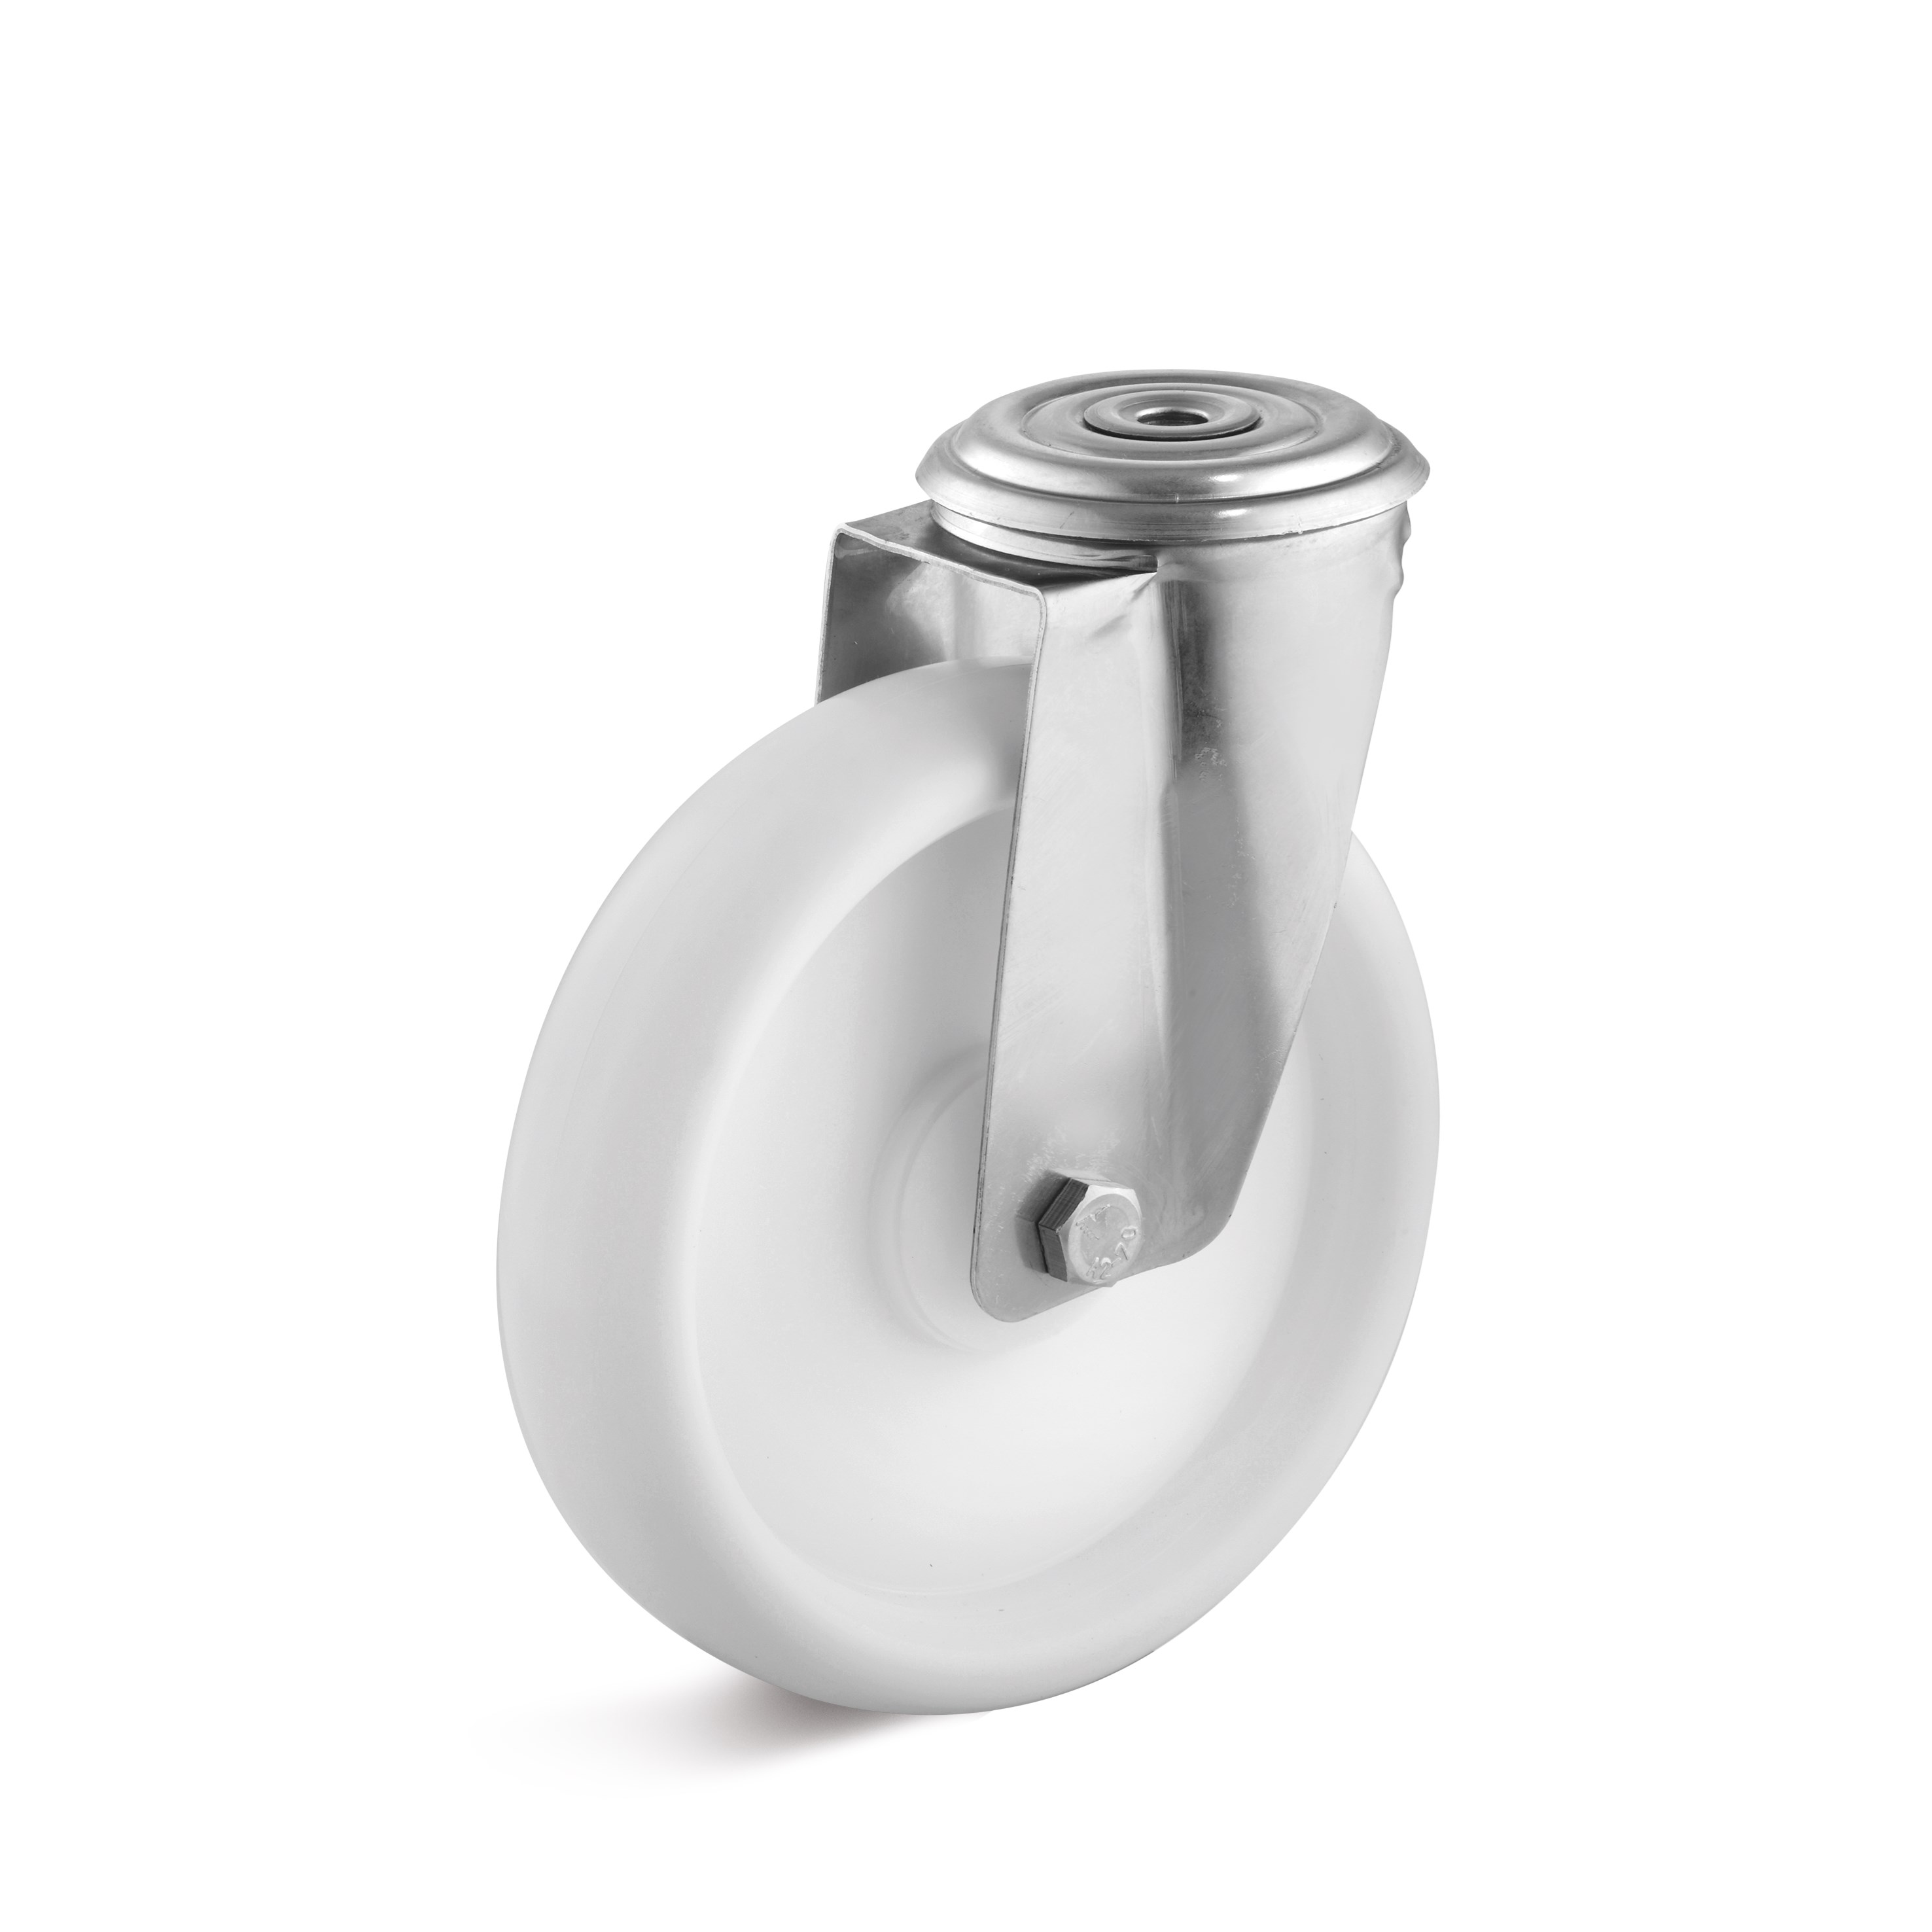 Stainless steel swivel castor with back hole and polypropylene wheel L-IV-PPBL-080-K-1